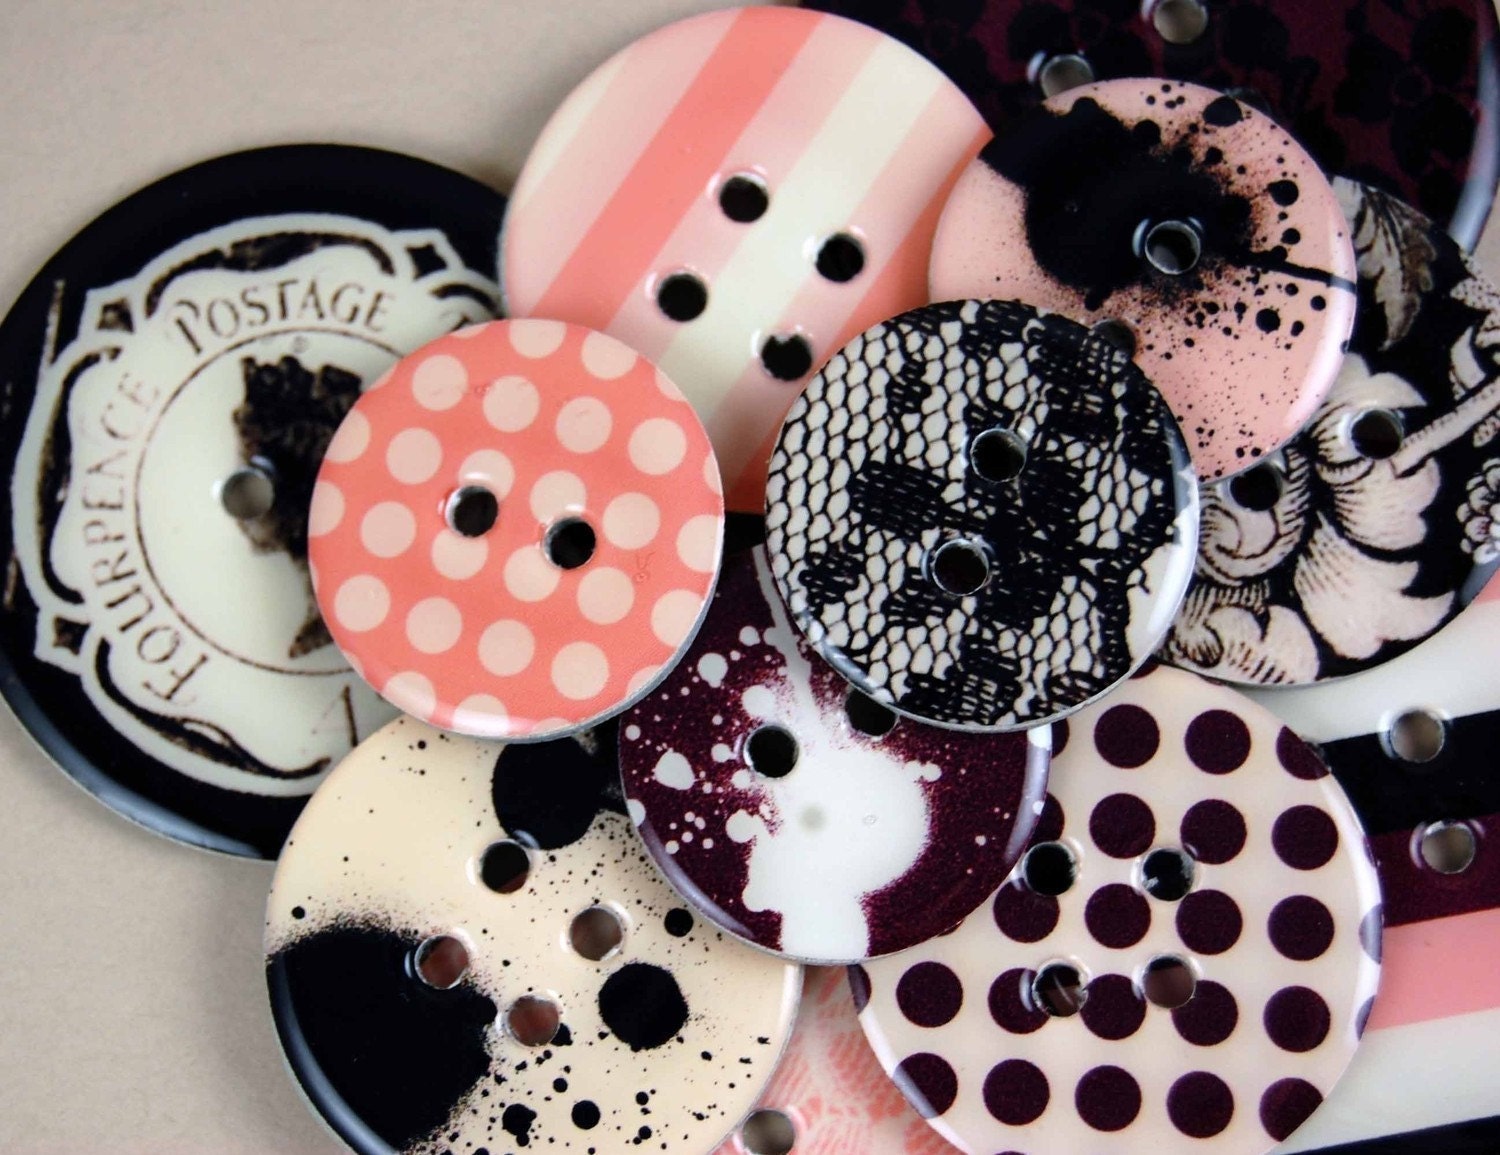 Vintage Lace set of 12 Chipboard Buttons